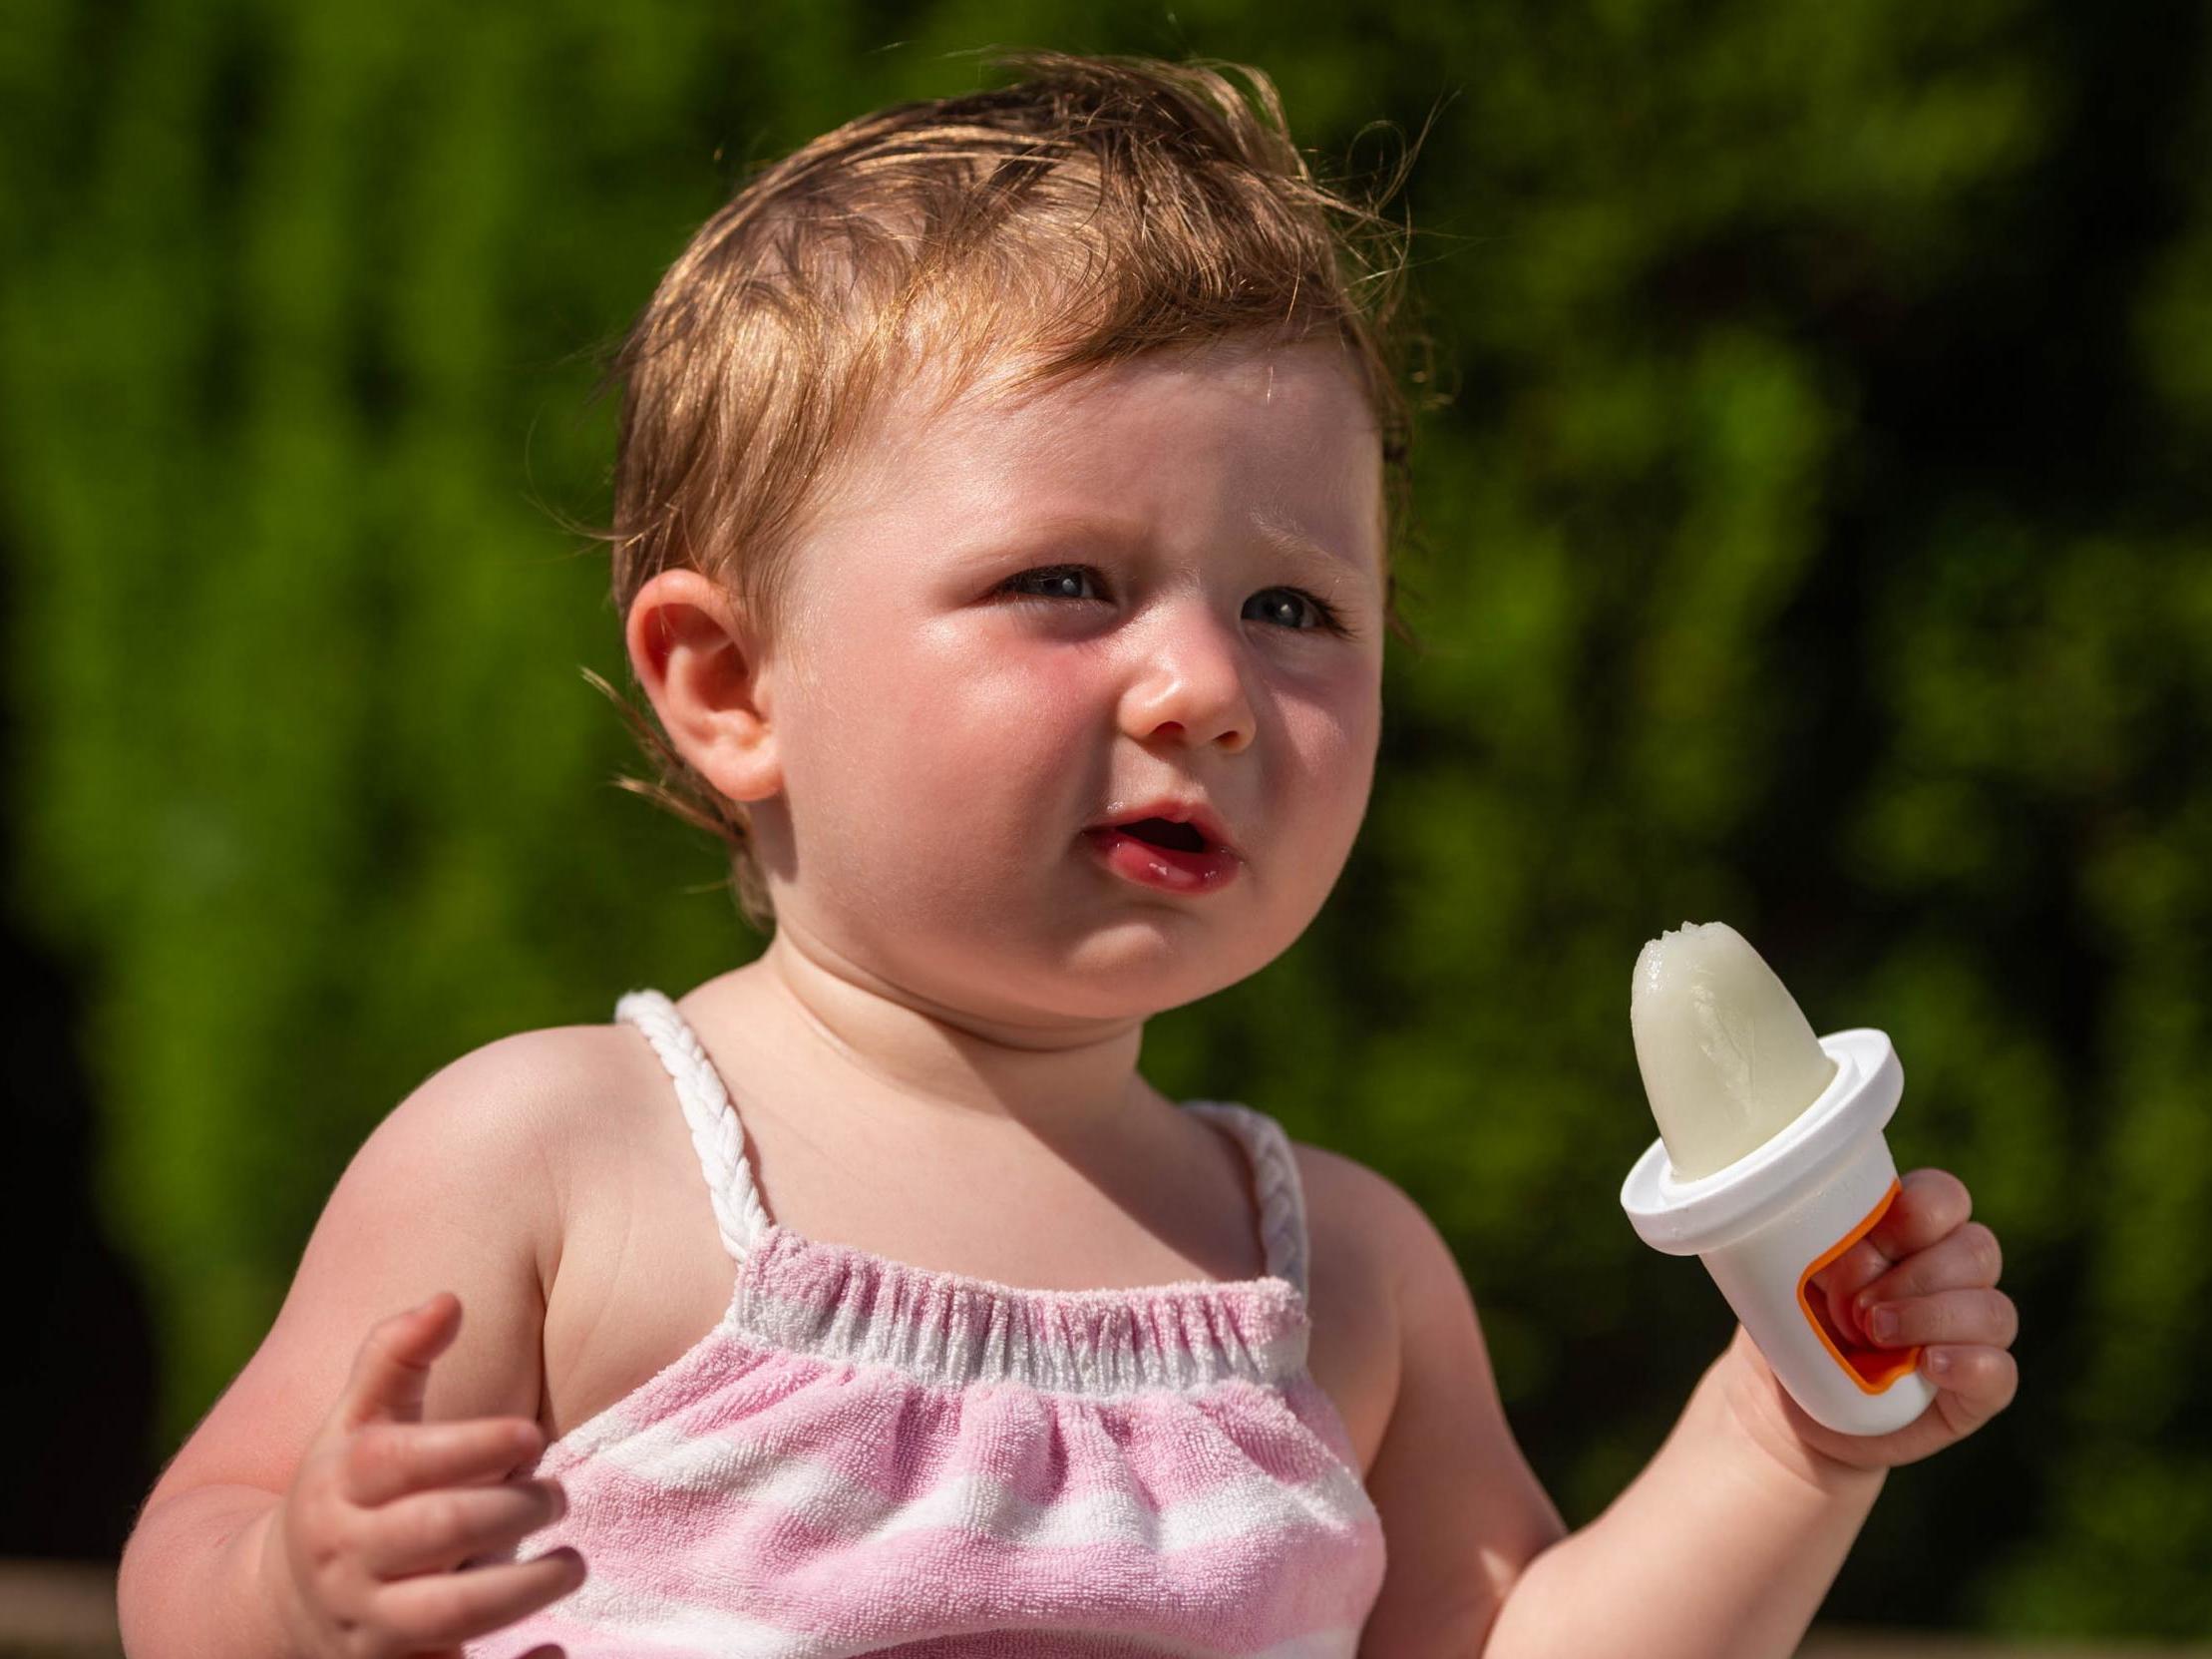 Mother makes breast milk ice lollies for baby during heatwave